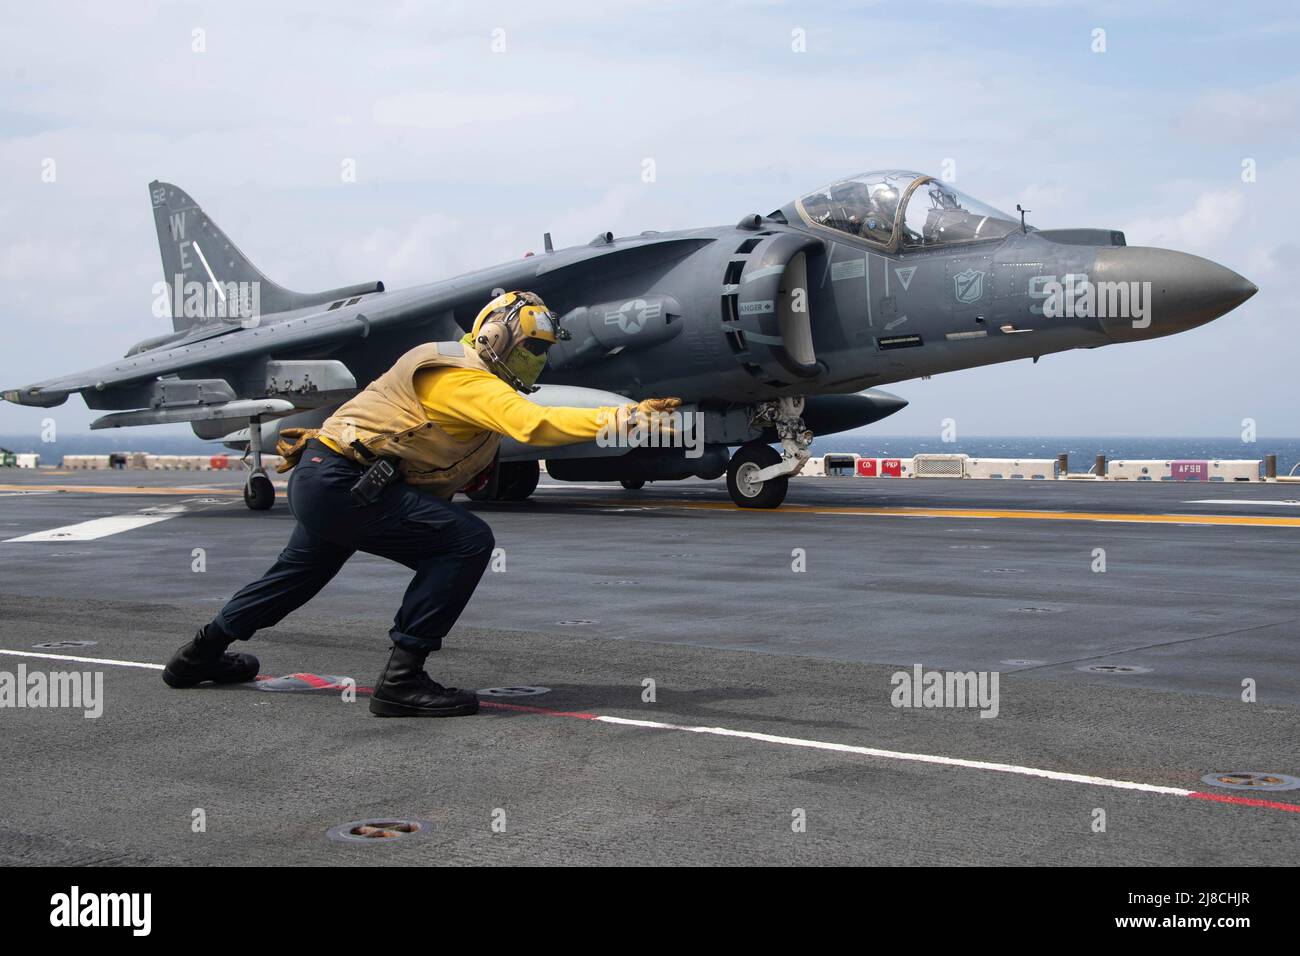 U.S. Navy Aviation Boatswains Mate 3rd Class Alissa Sanchez signals a Marine Corps AV-8B Harrier attached to the Black Sheep of Marine Attack Squadron 214, to launch from the flight deck of the Wasp-class amphibious assault ship USS Essex, January 14, 2022 on the South China Sea. Stock Photo